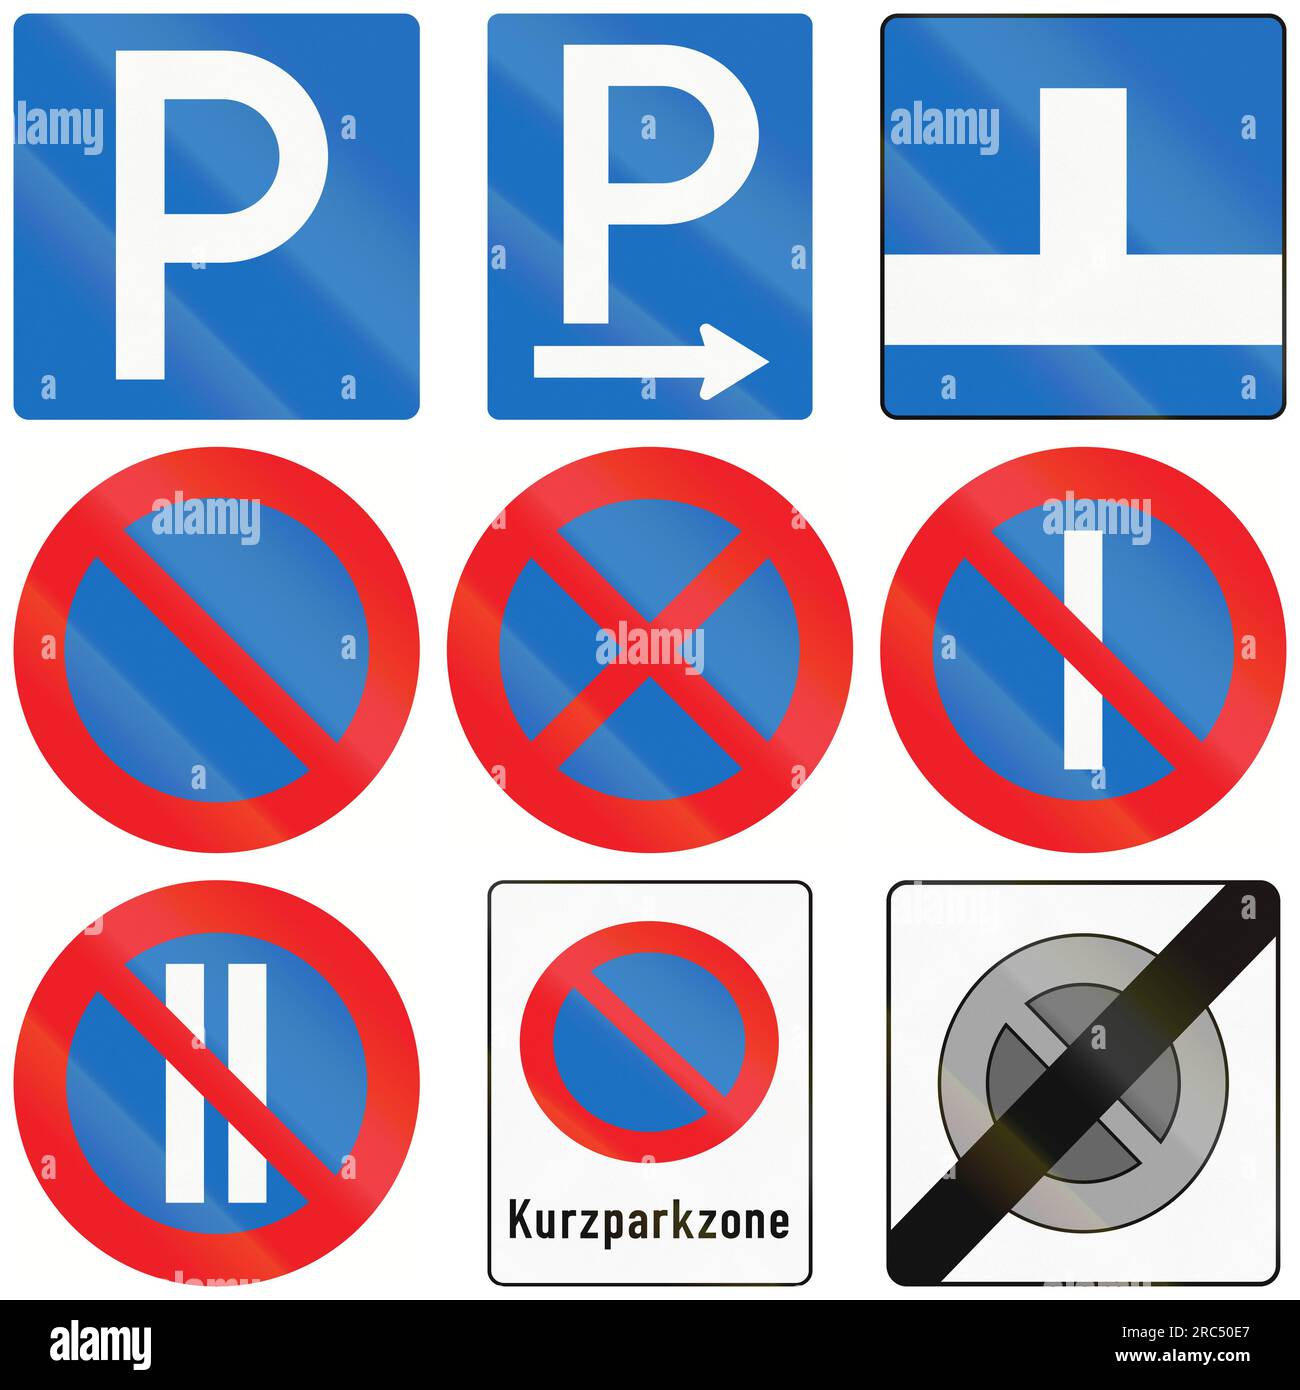 Collection of Austrian traffic signs about parking permission and restriction. Stock Photo